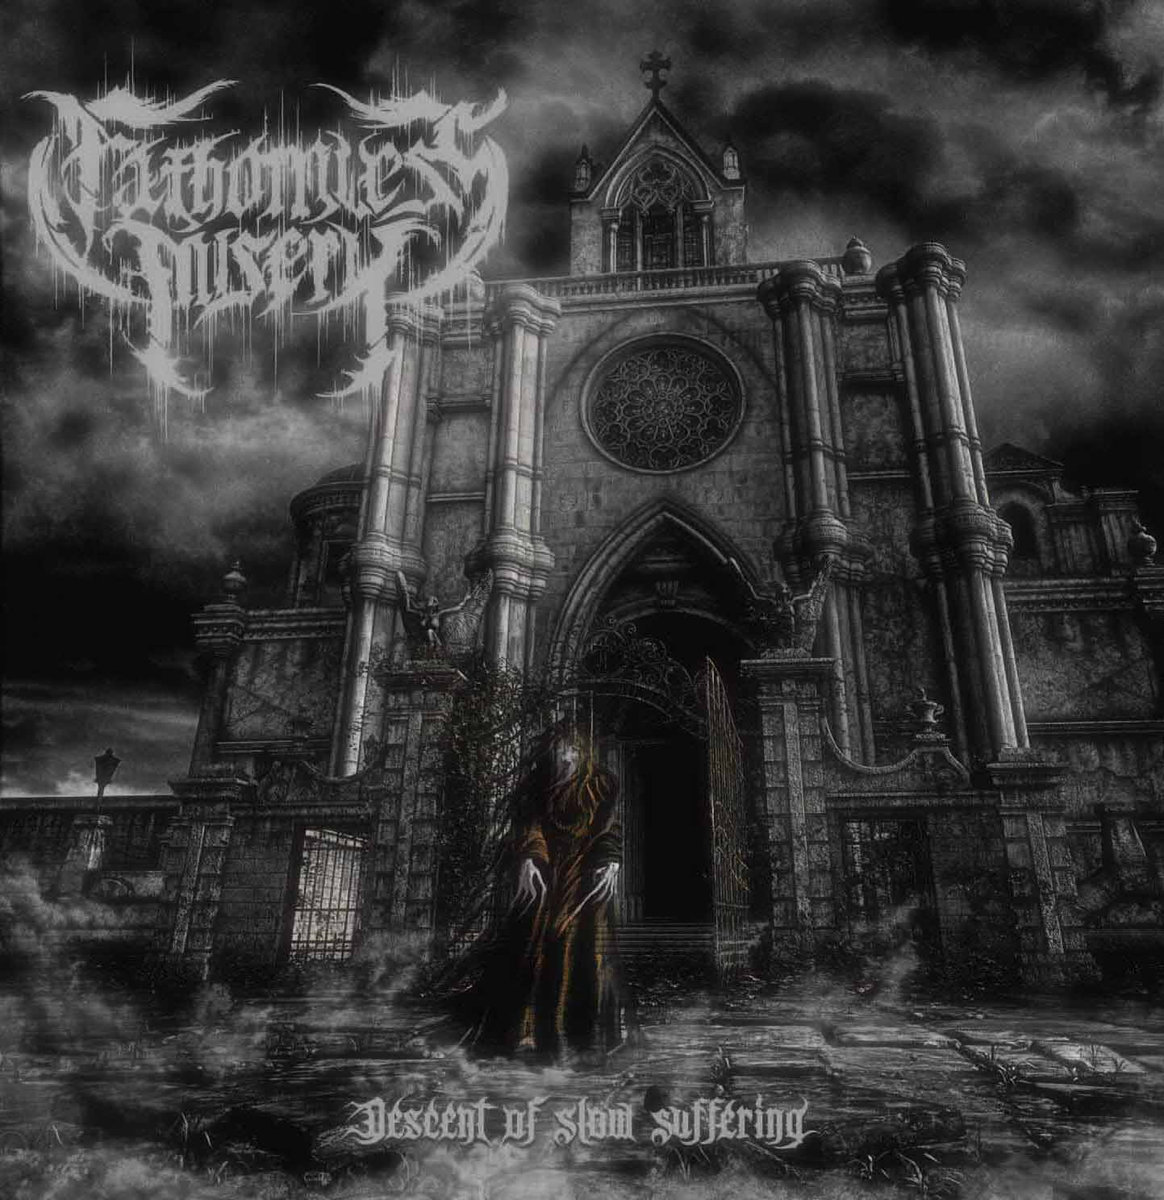 FATHOMLESS MISERY'Descent Of Slow Suffering' CD.